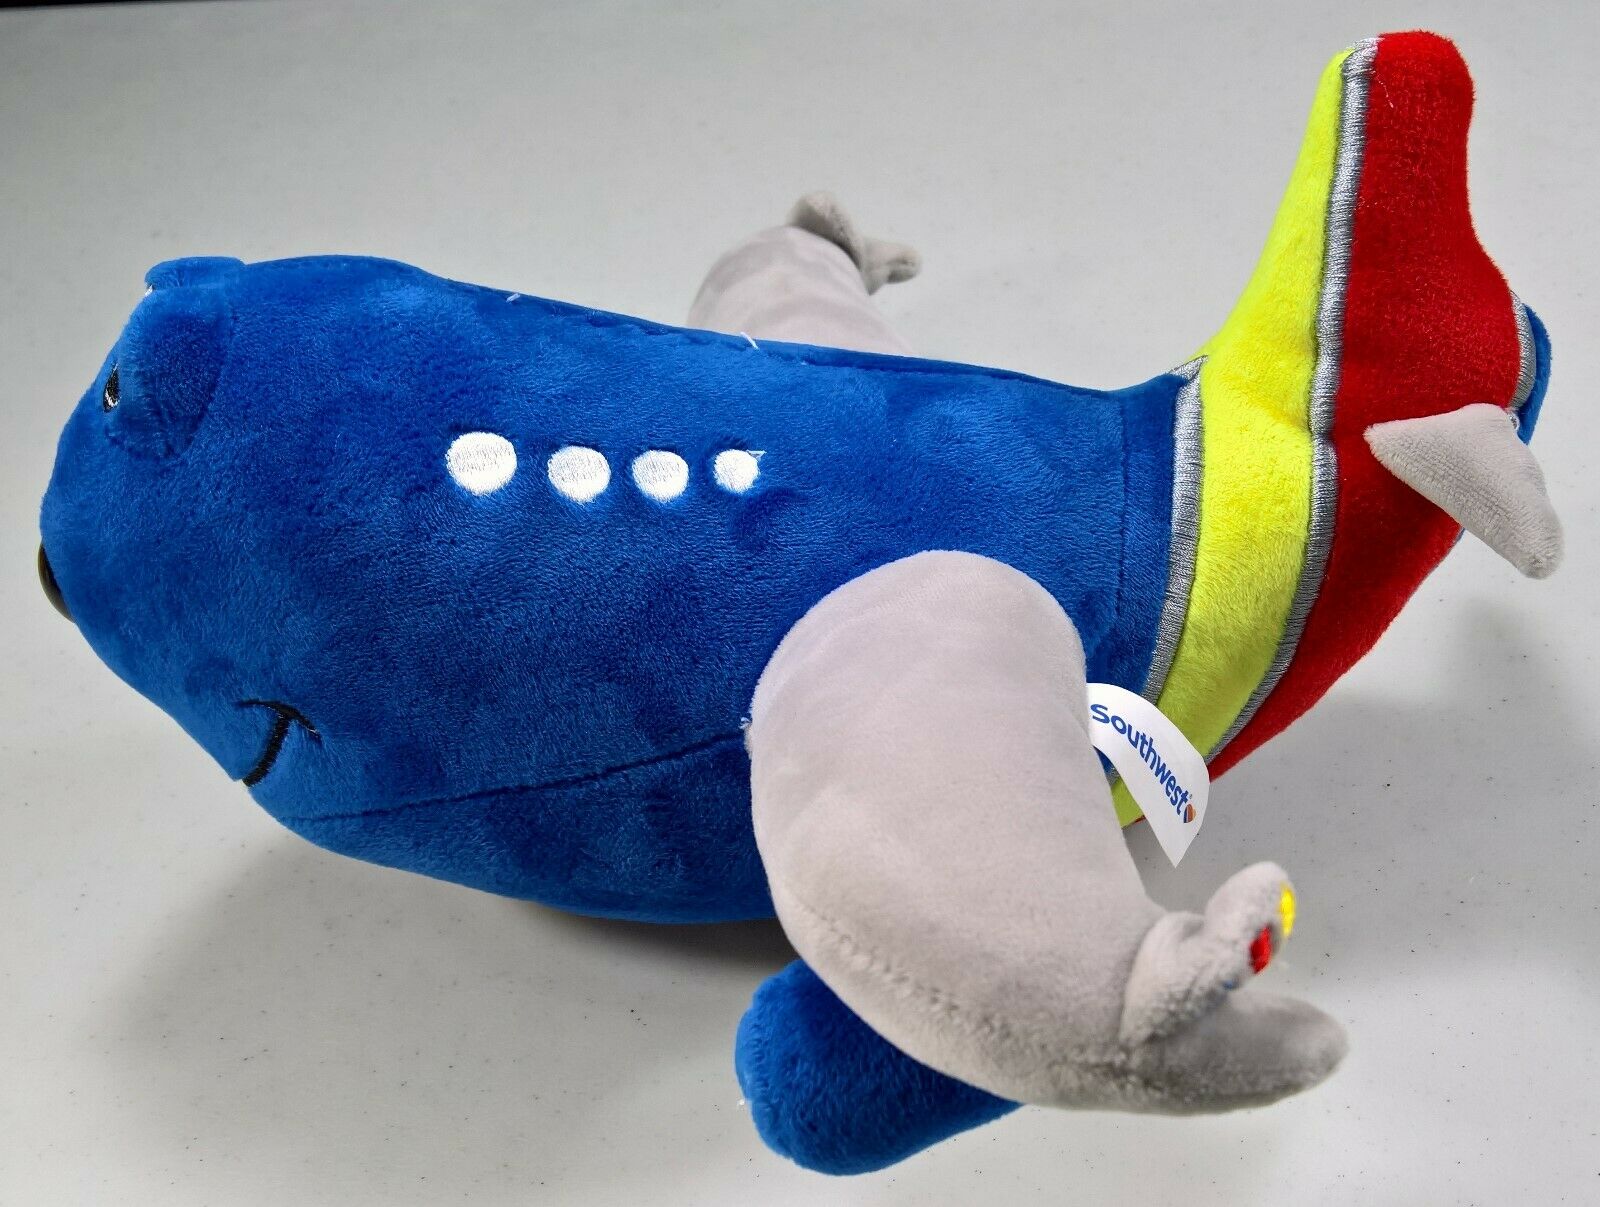 Daron - 12in. Plush/stuffed Airplane - Southwest Airlines Mascot